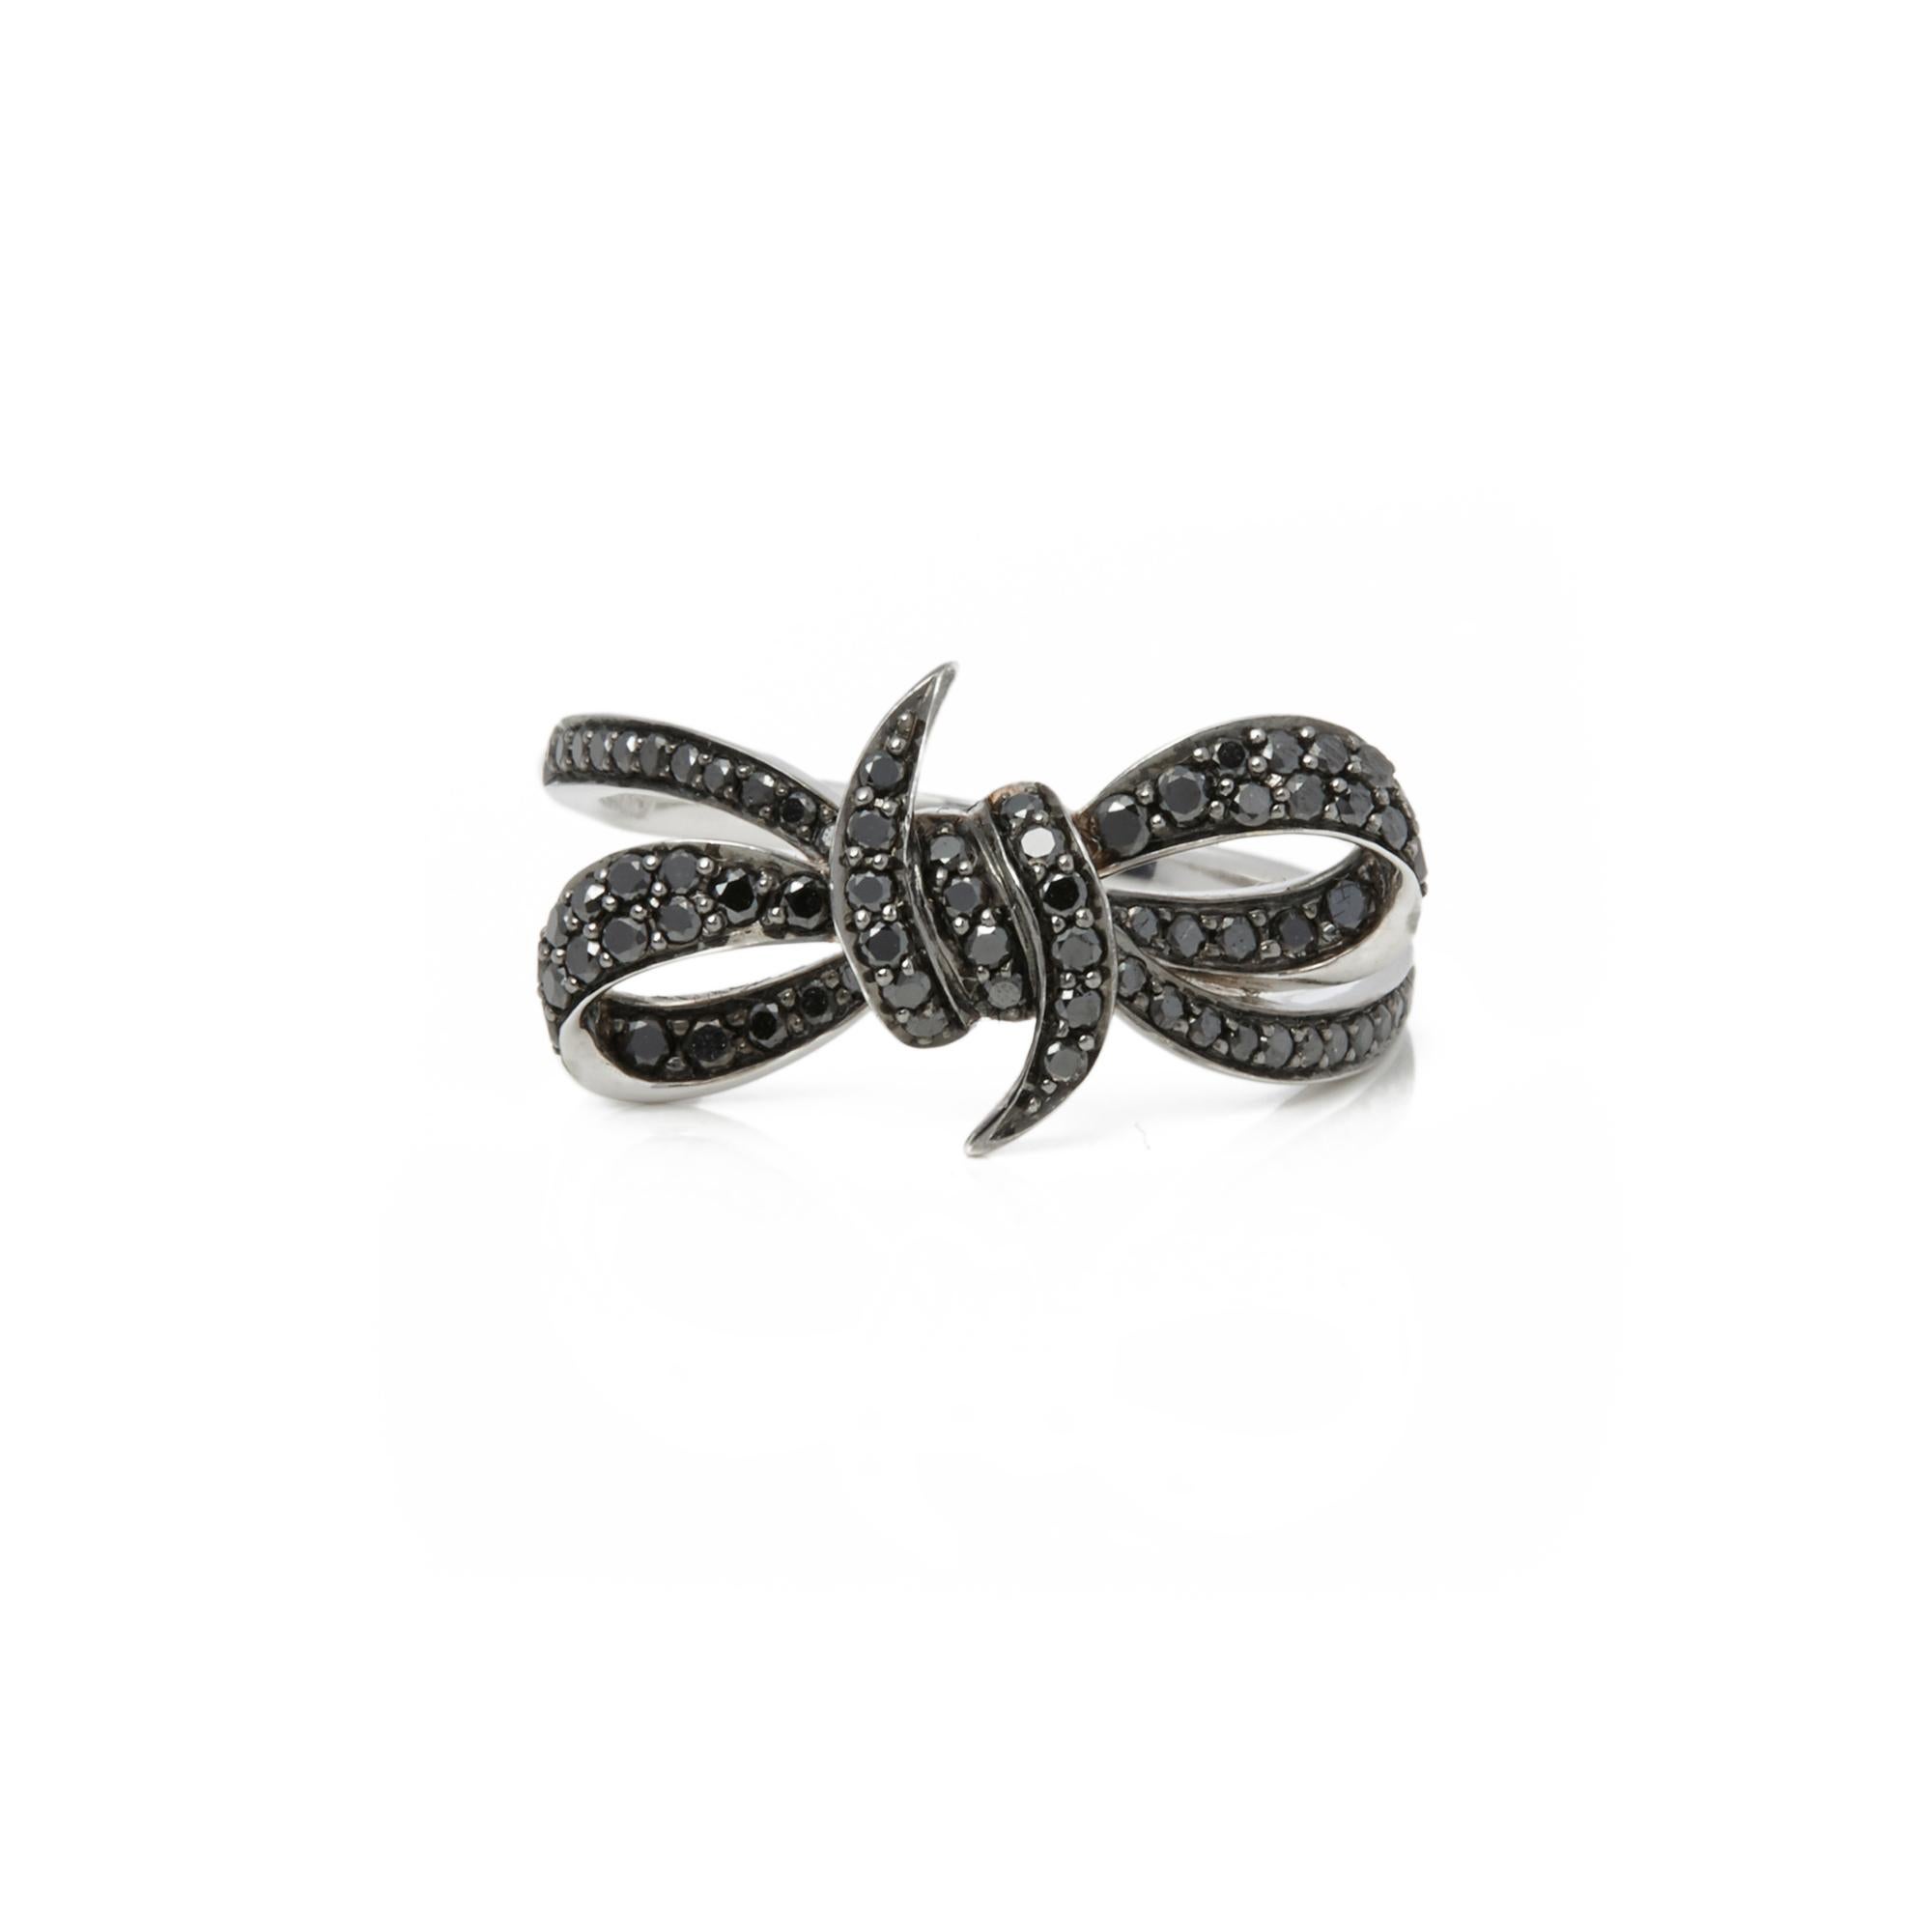 This ring by Stephen Webster is from his Forget me Knot collection and features pave set black diamonds. Set in white gold with signature band. Ring Size M. Complete with Xupes presentation box. Our Xupes reference is COMJ435 should you need to